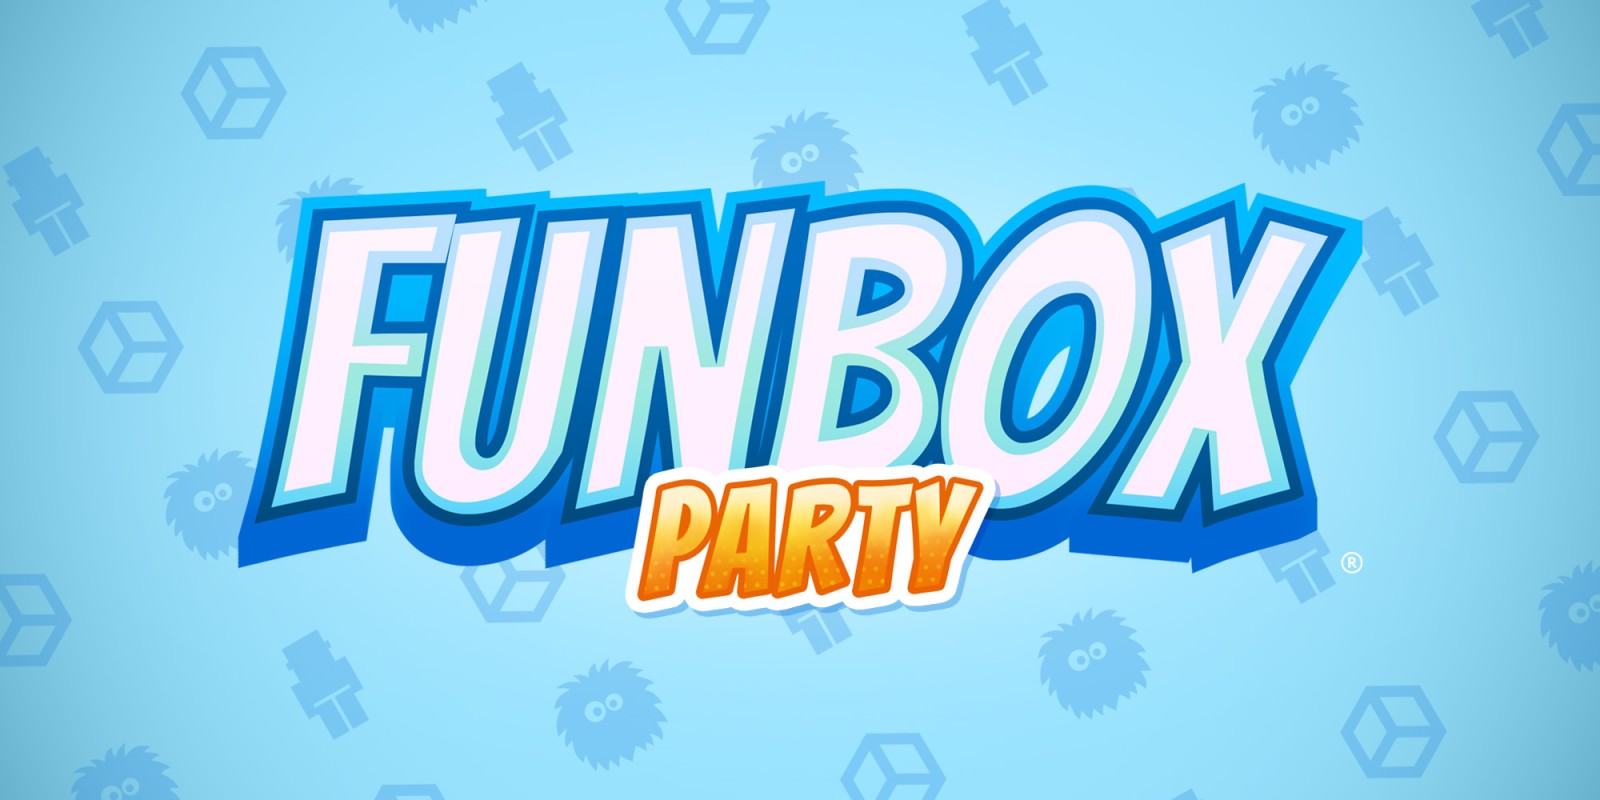 FunBox Party